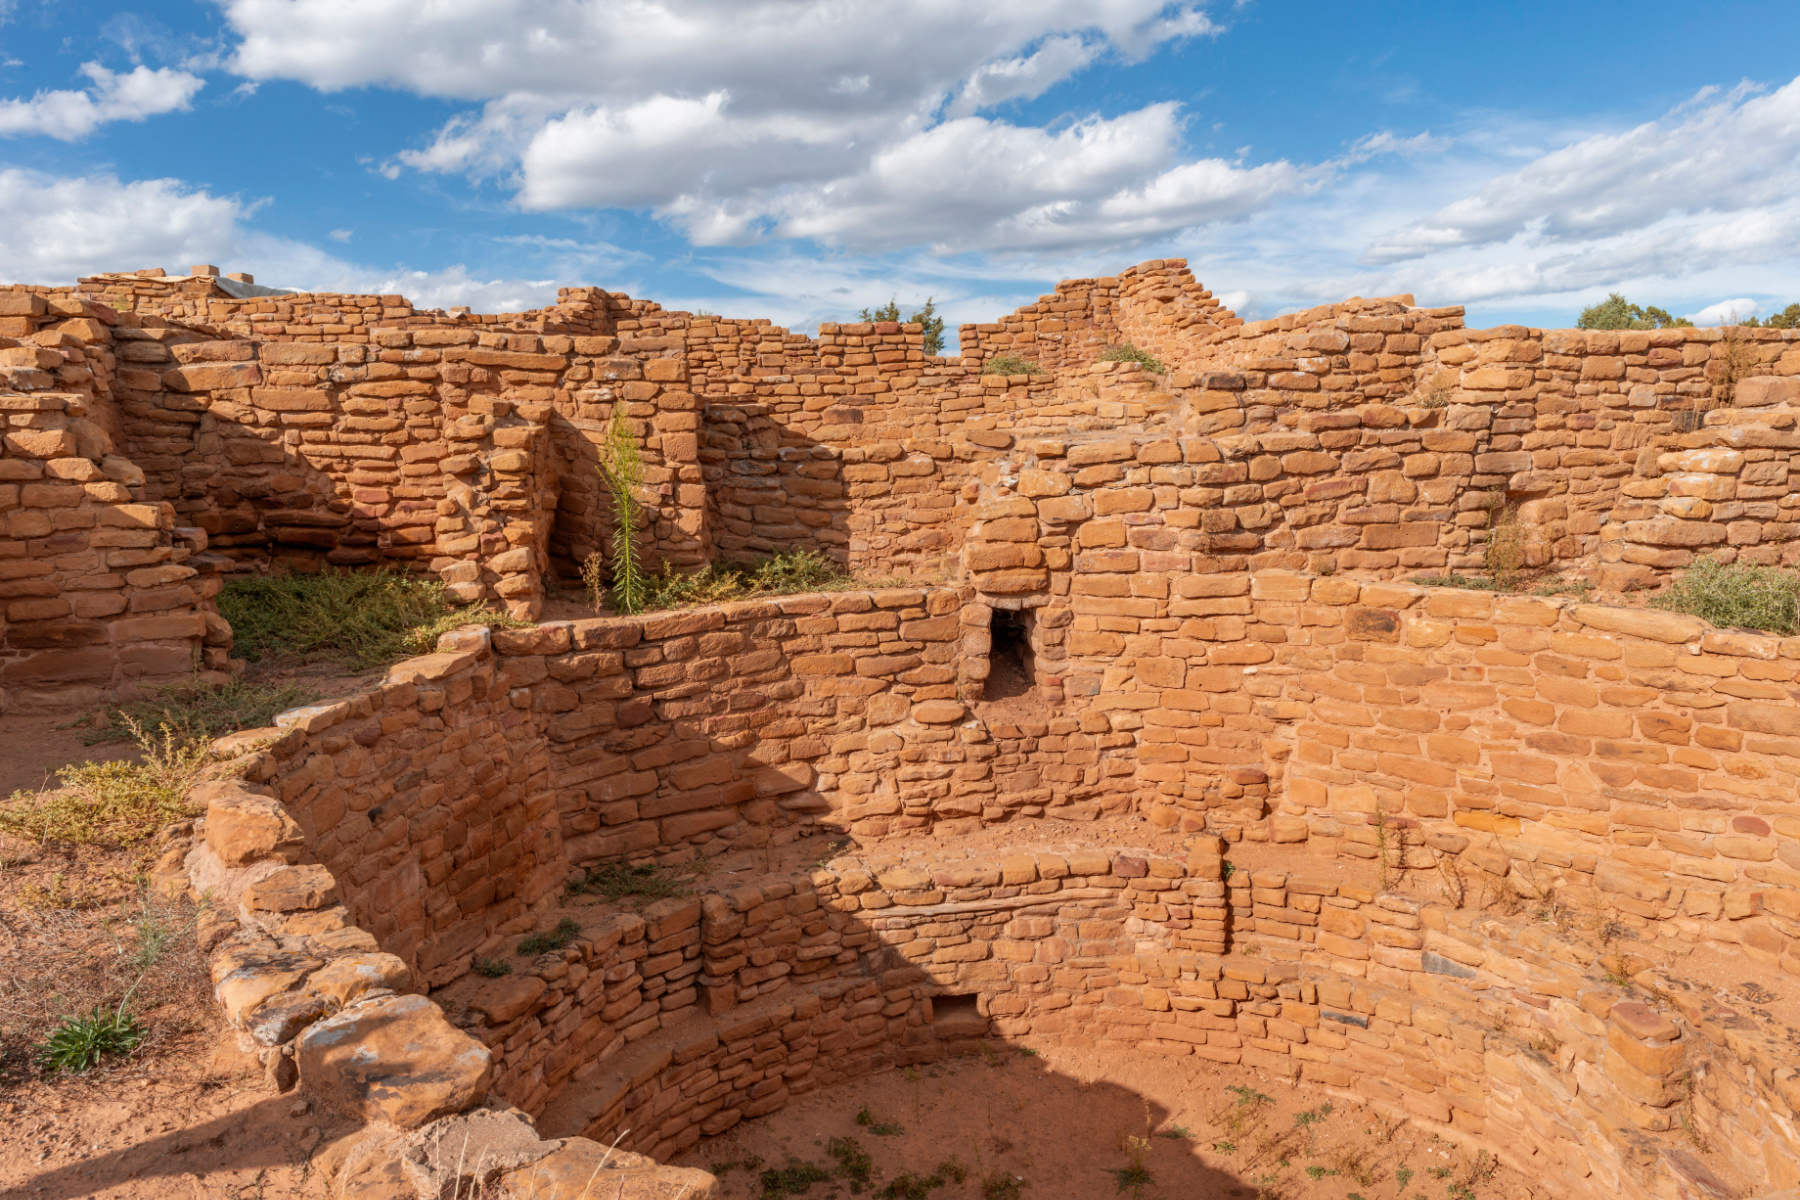 Far View House with its ceremonial kiva built into the ground is one of the best things to do at Mesa Verde National Park.